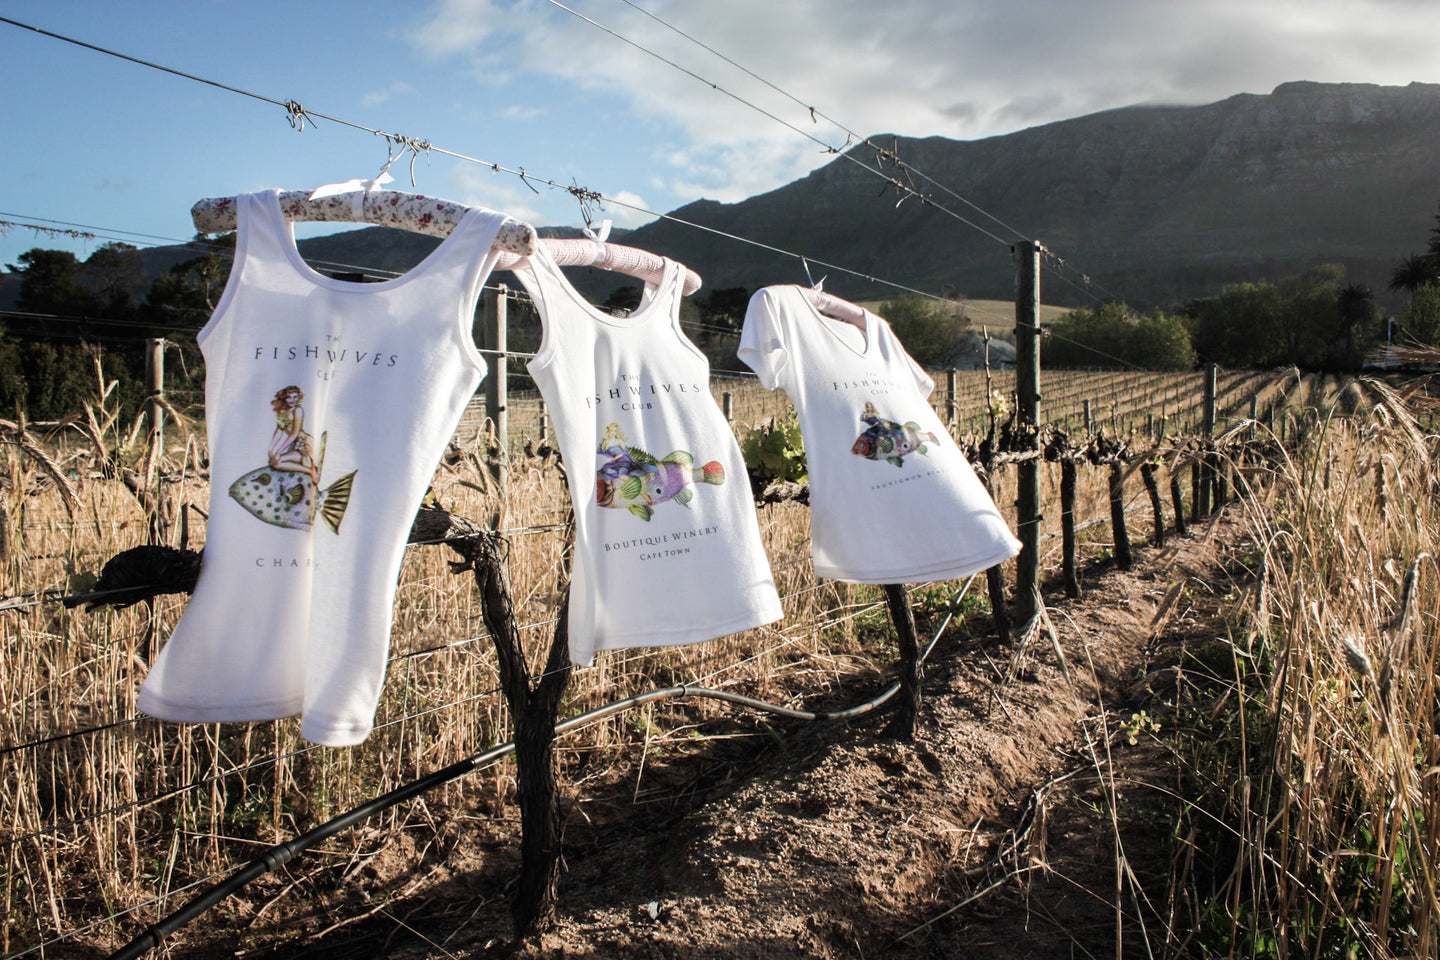 T-shirts hanging in the vineyards